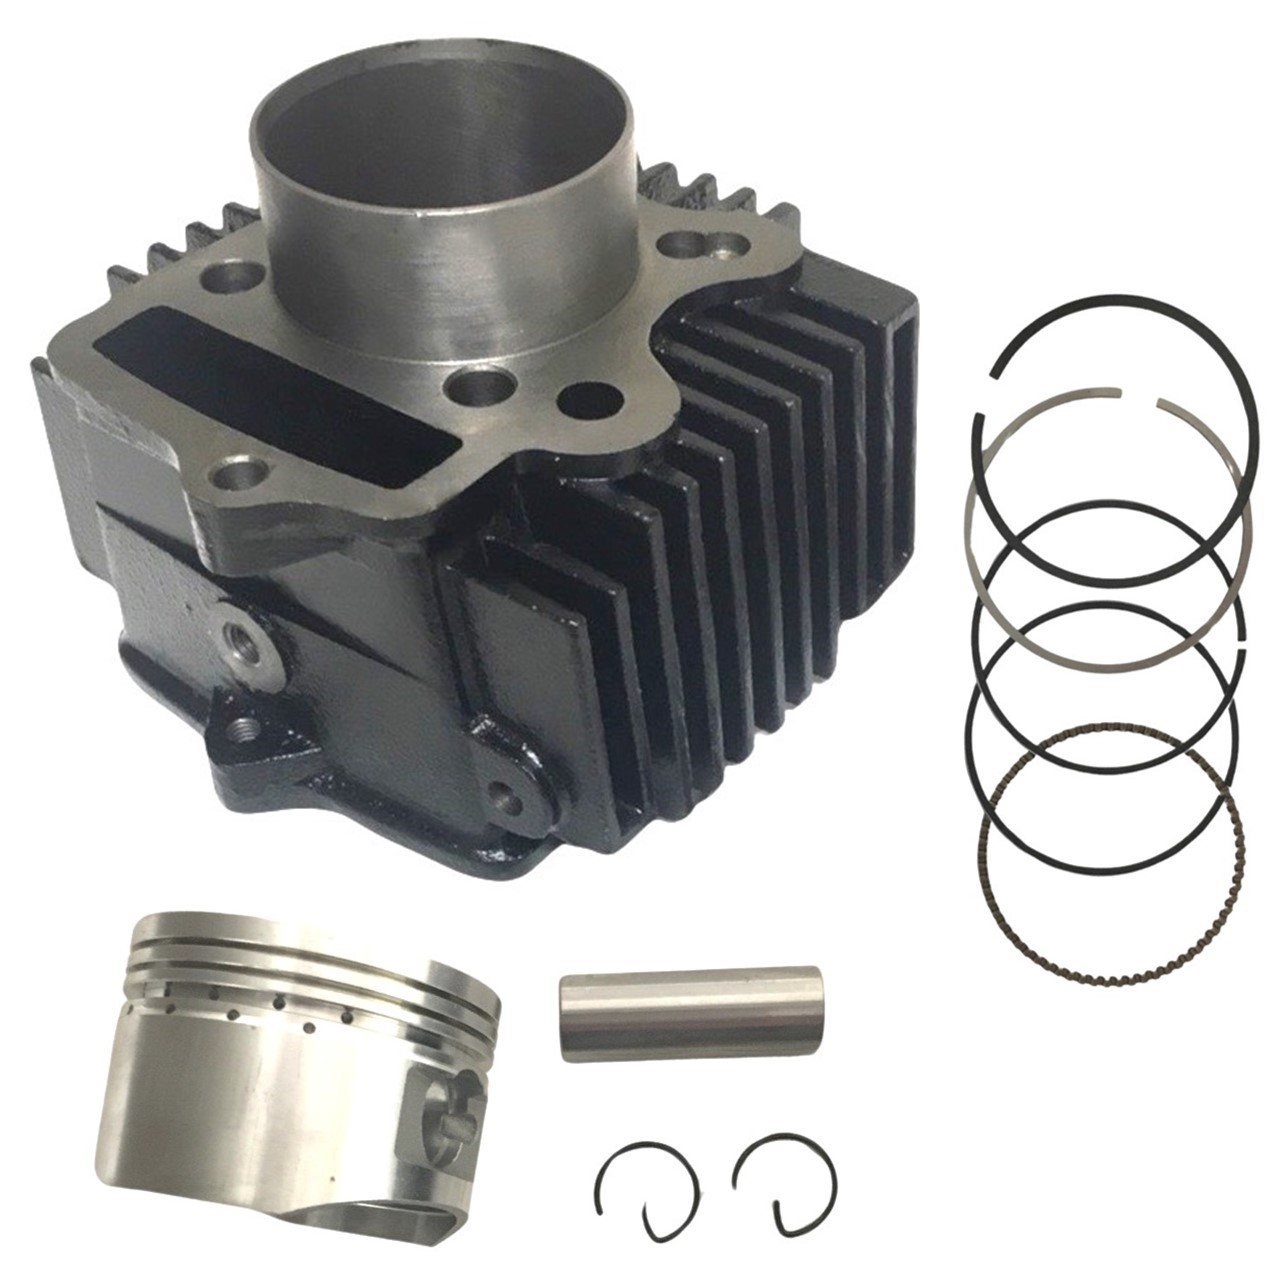 Cylinder Piston Top End Kit 110cc 4 Stroke Chinese 110cc ATVs, Dirtbikes B=52mm, H=69mm